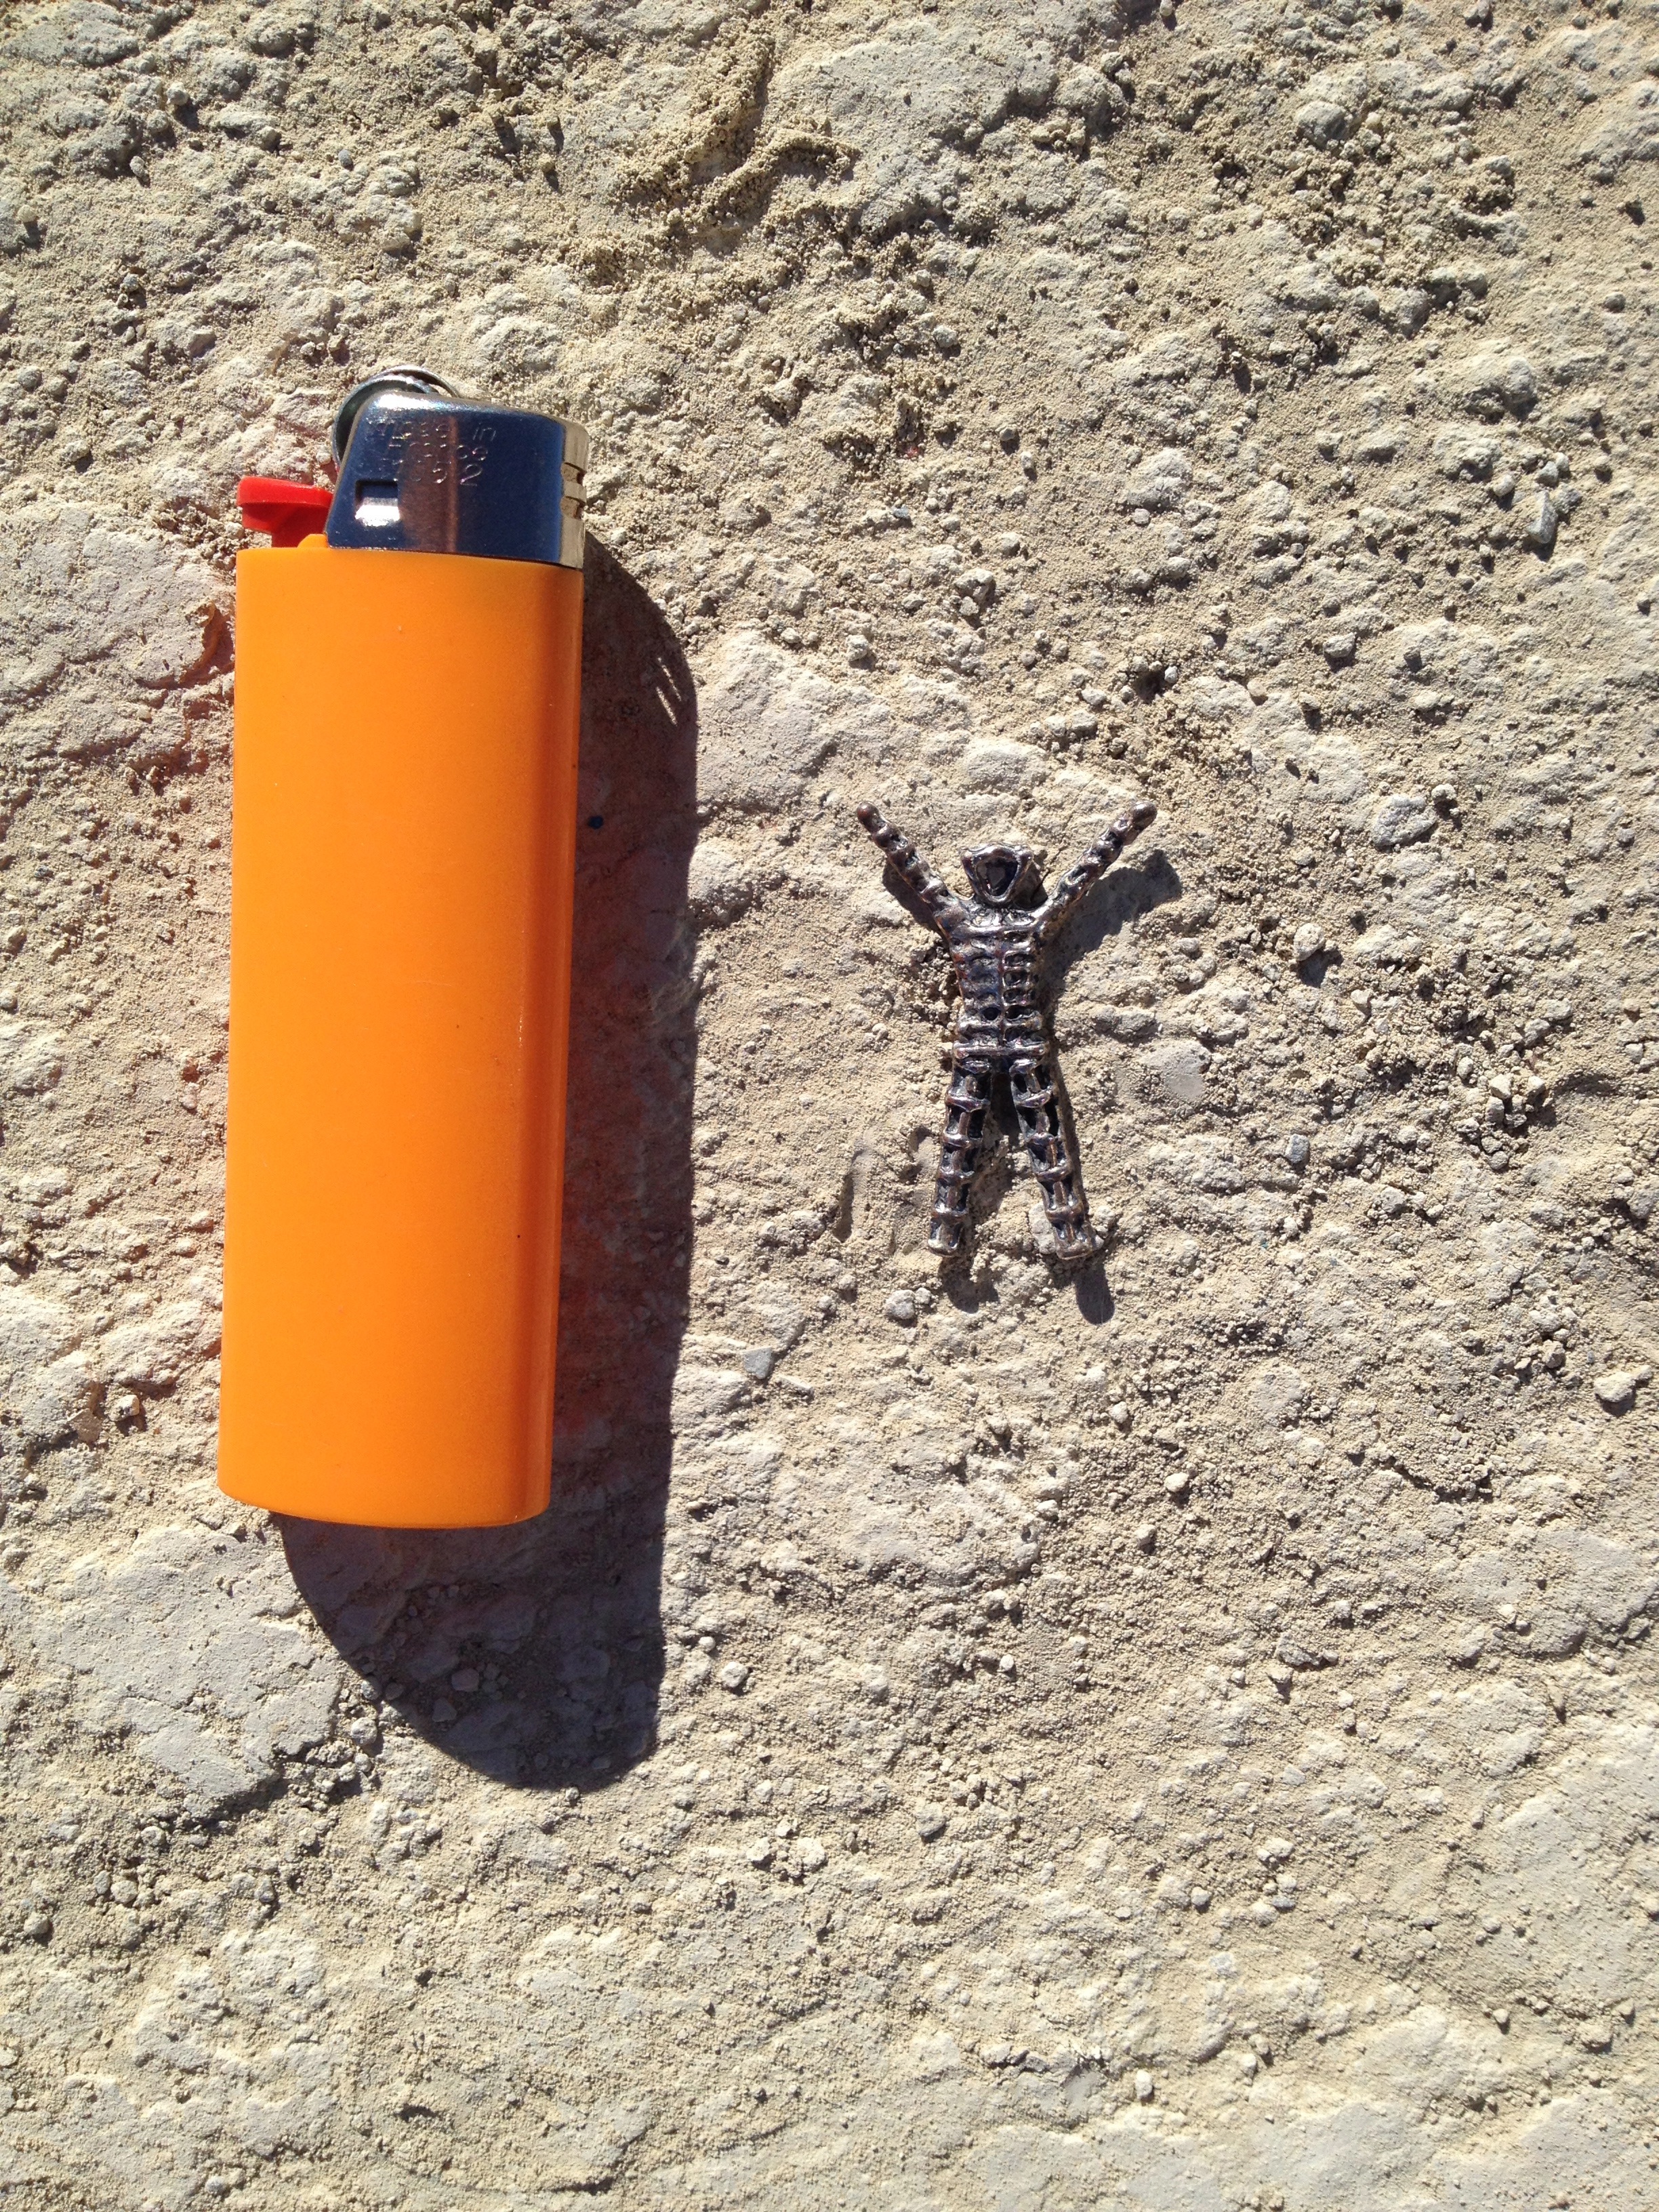 We got to the shoreline on Resto's first day and looked down at our feet. And there he was: The first piece of MOOP this writer scored for 2016 (lighter added for scale). A good sign, we'd say.